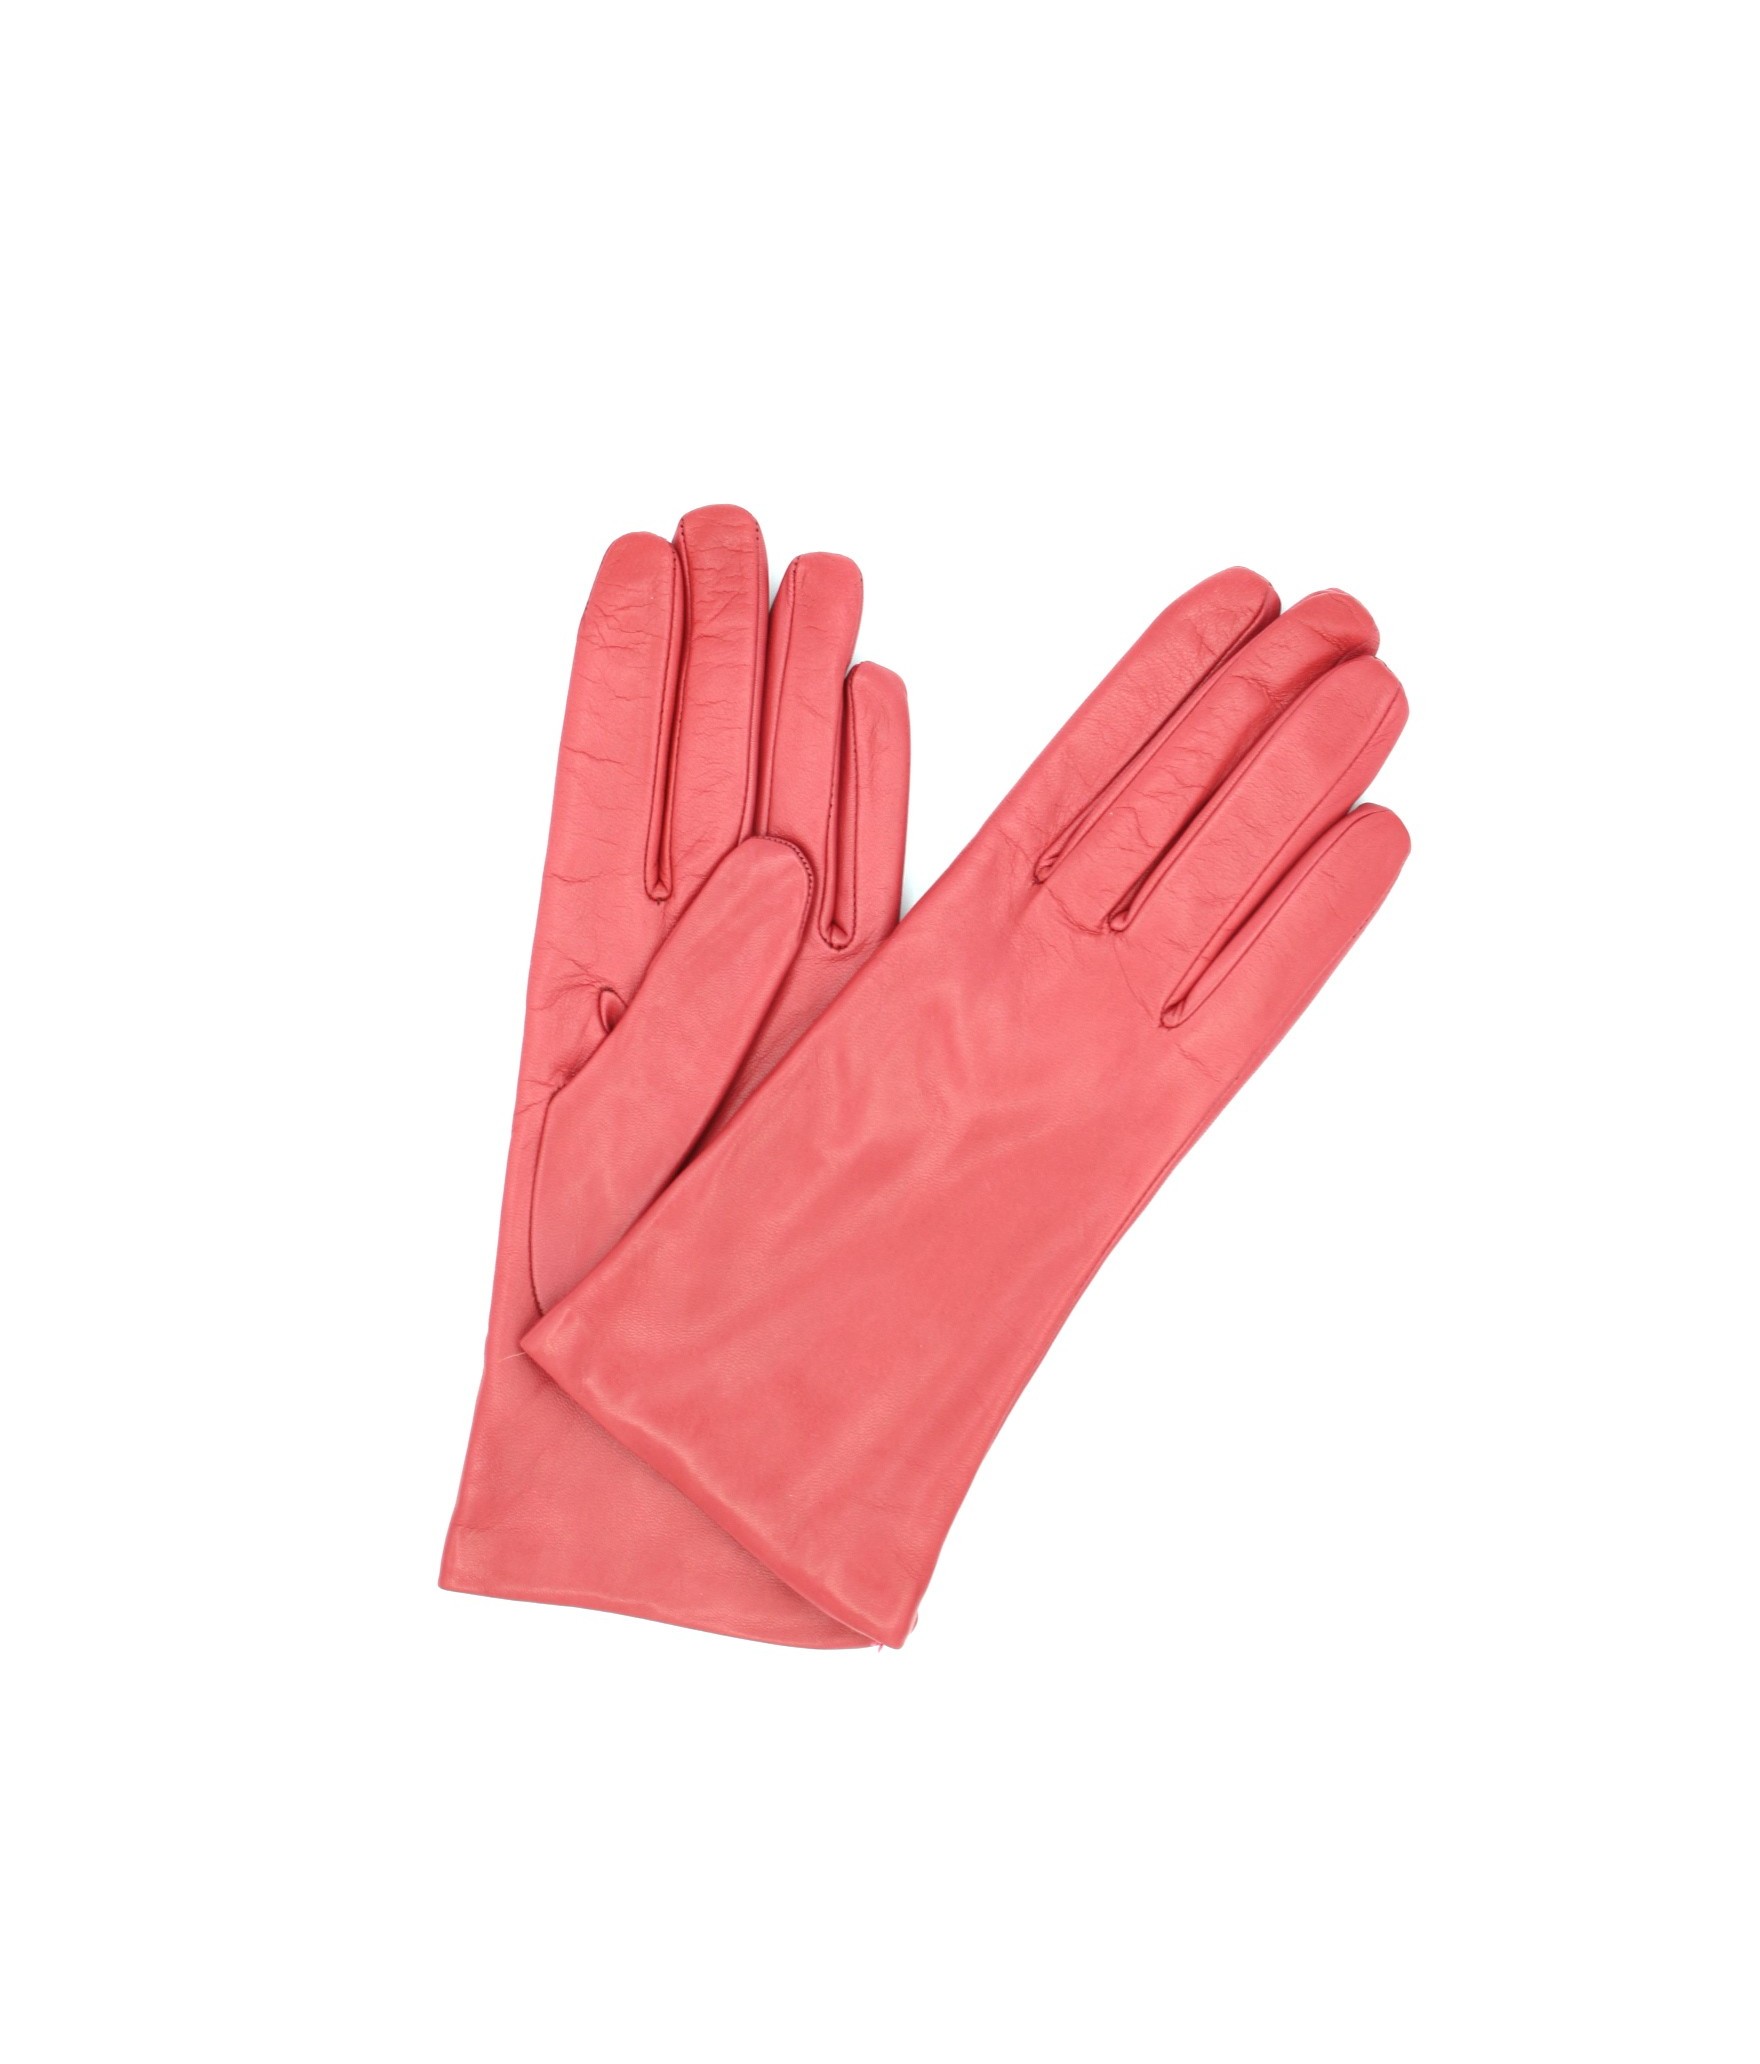 1011 Classic Kid Leather Gloves Cashmere Lined Rosa corallo